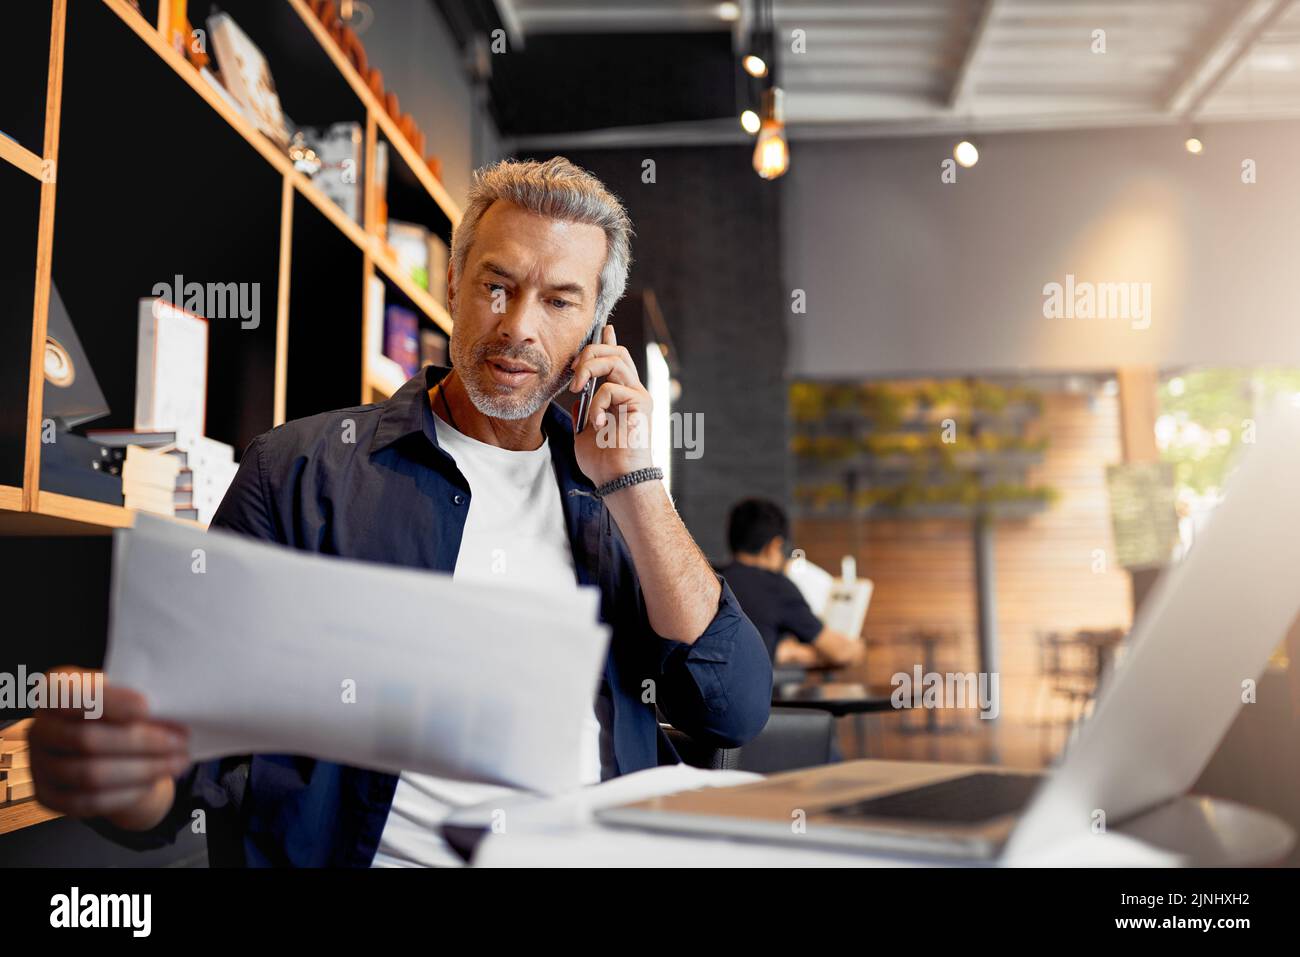 Ive got the report in my hand as we speak. a handsome mature businessman working in his local internet cafe. Stock Photo